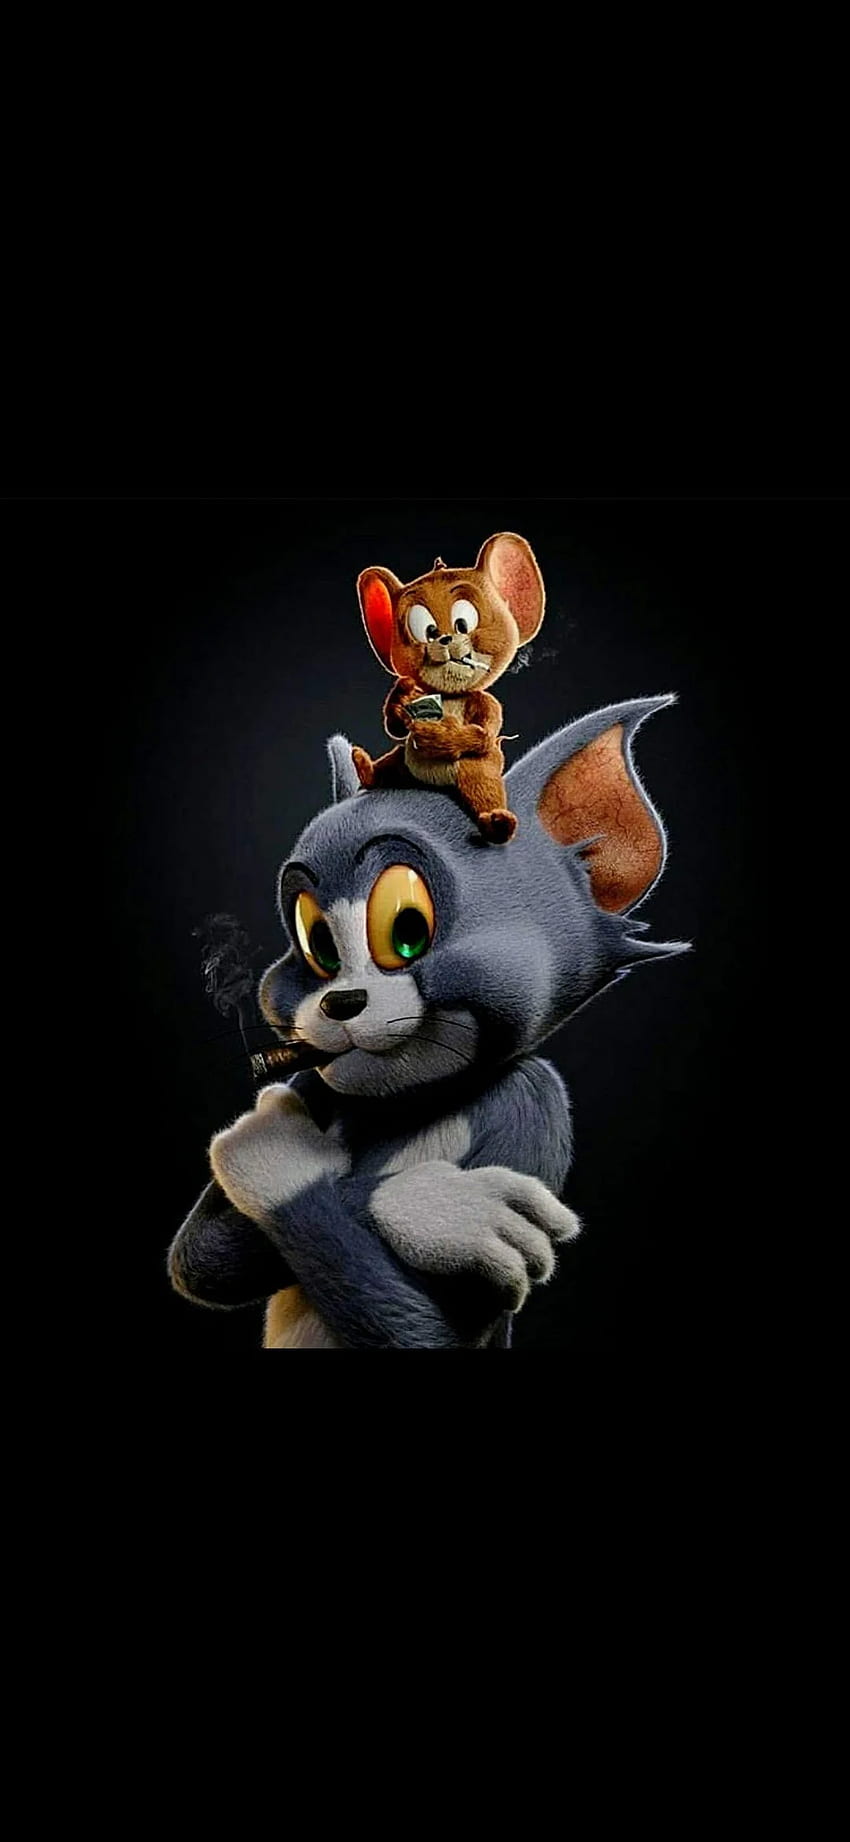 Incredible Collection of 999+ HD Tom and Jerry Images in Full 4K